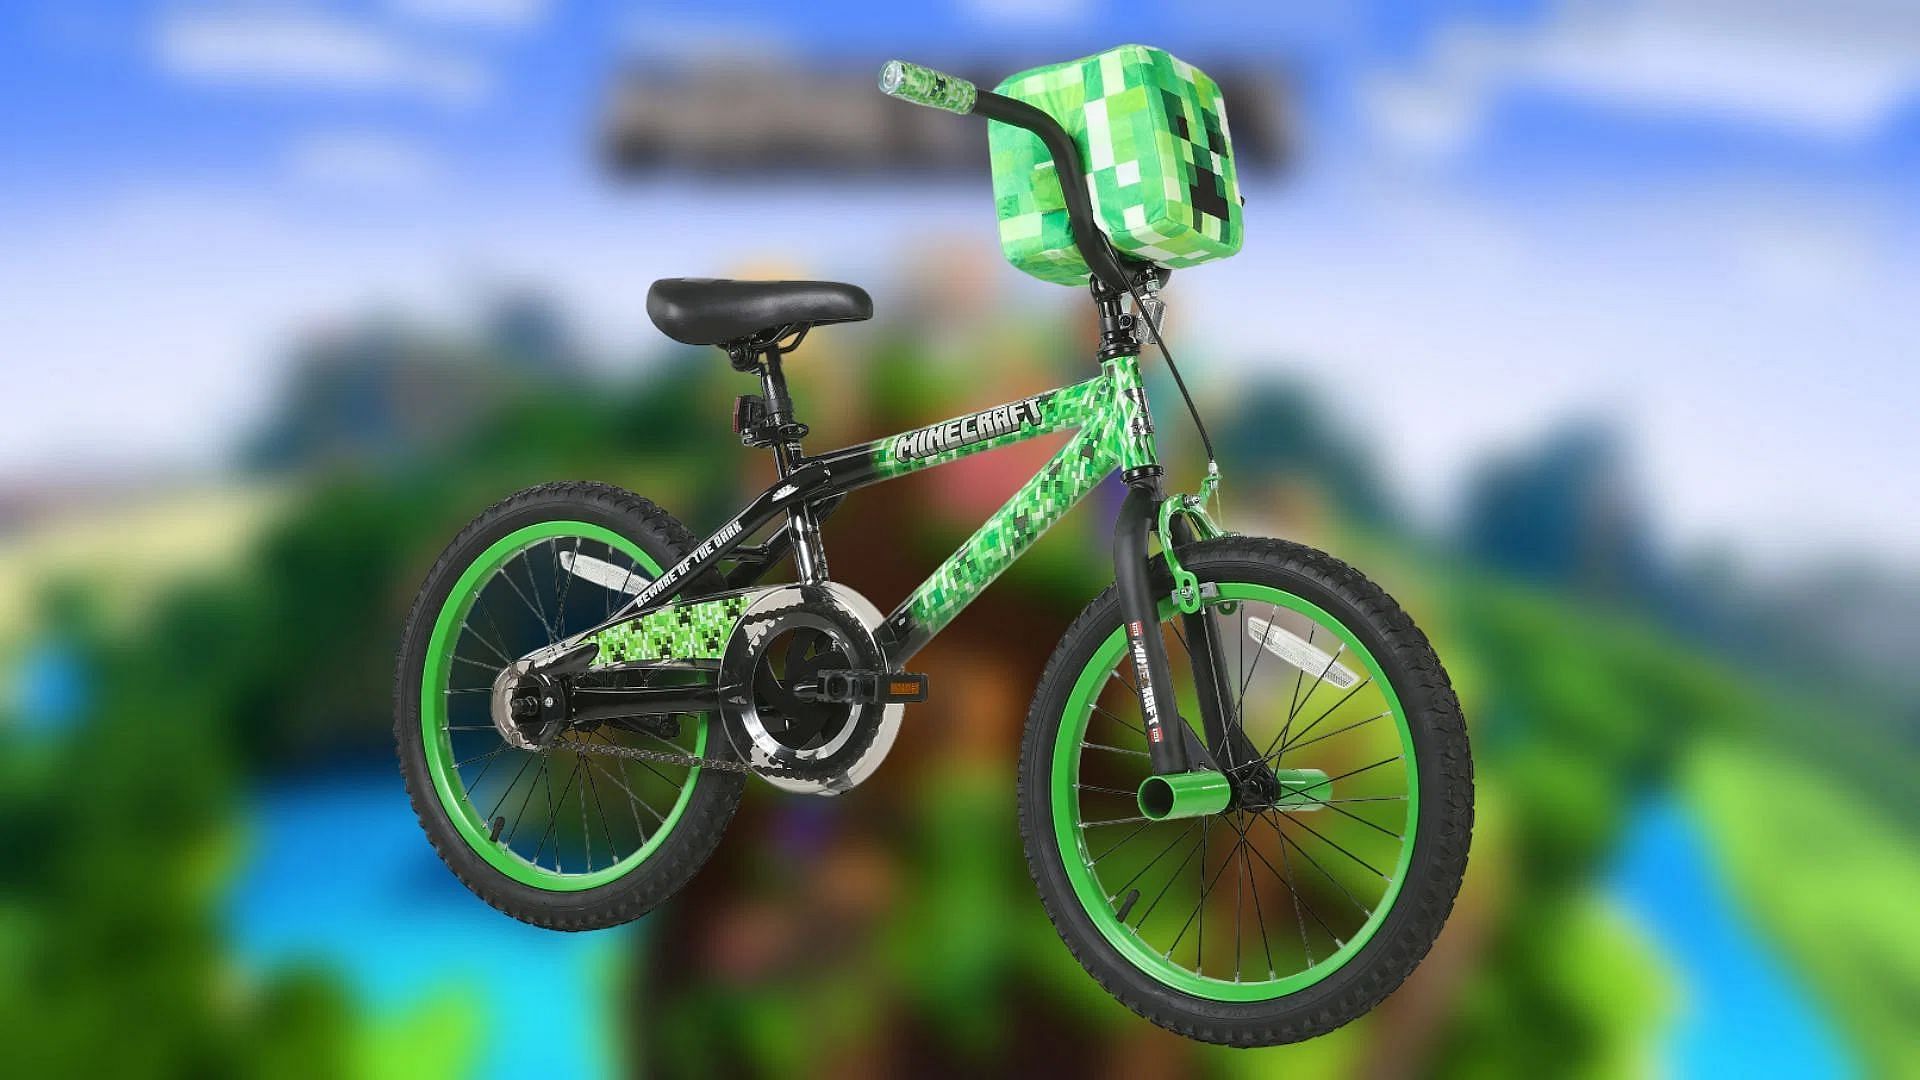 The creeper bicycle is suitable for young fans aged 6-9 years old (Image via Mojang Studios/Dynacraft)